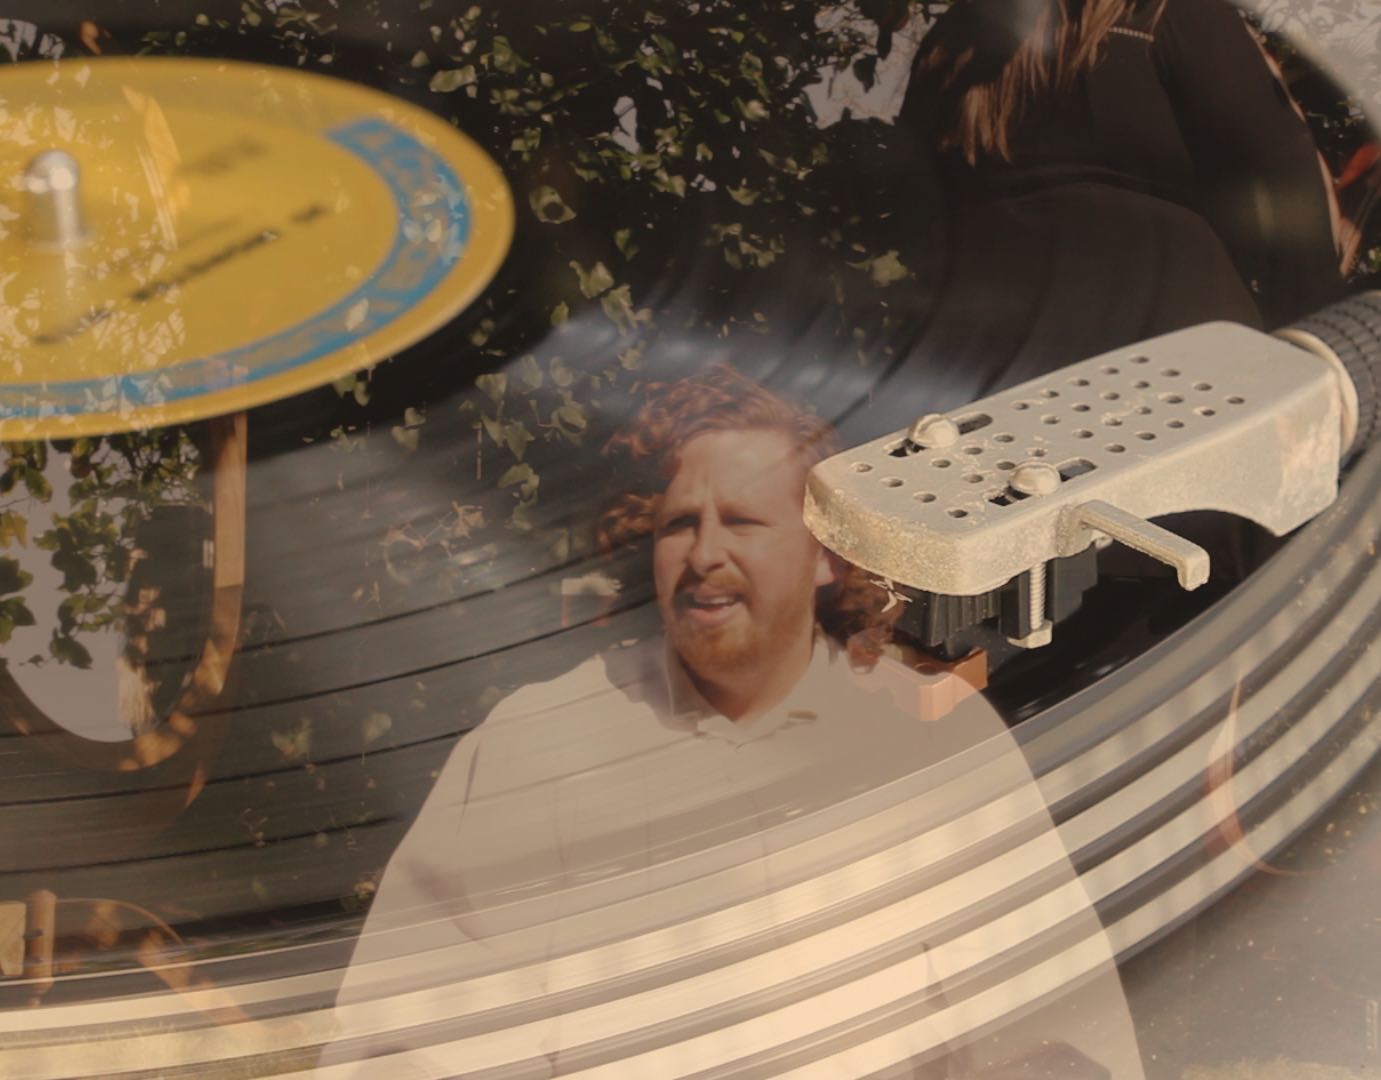 Still of a bewildered man sitting up in a white robe with a partially opaque record player over the image